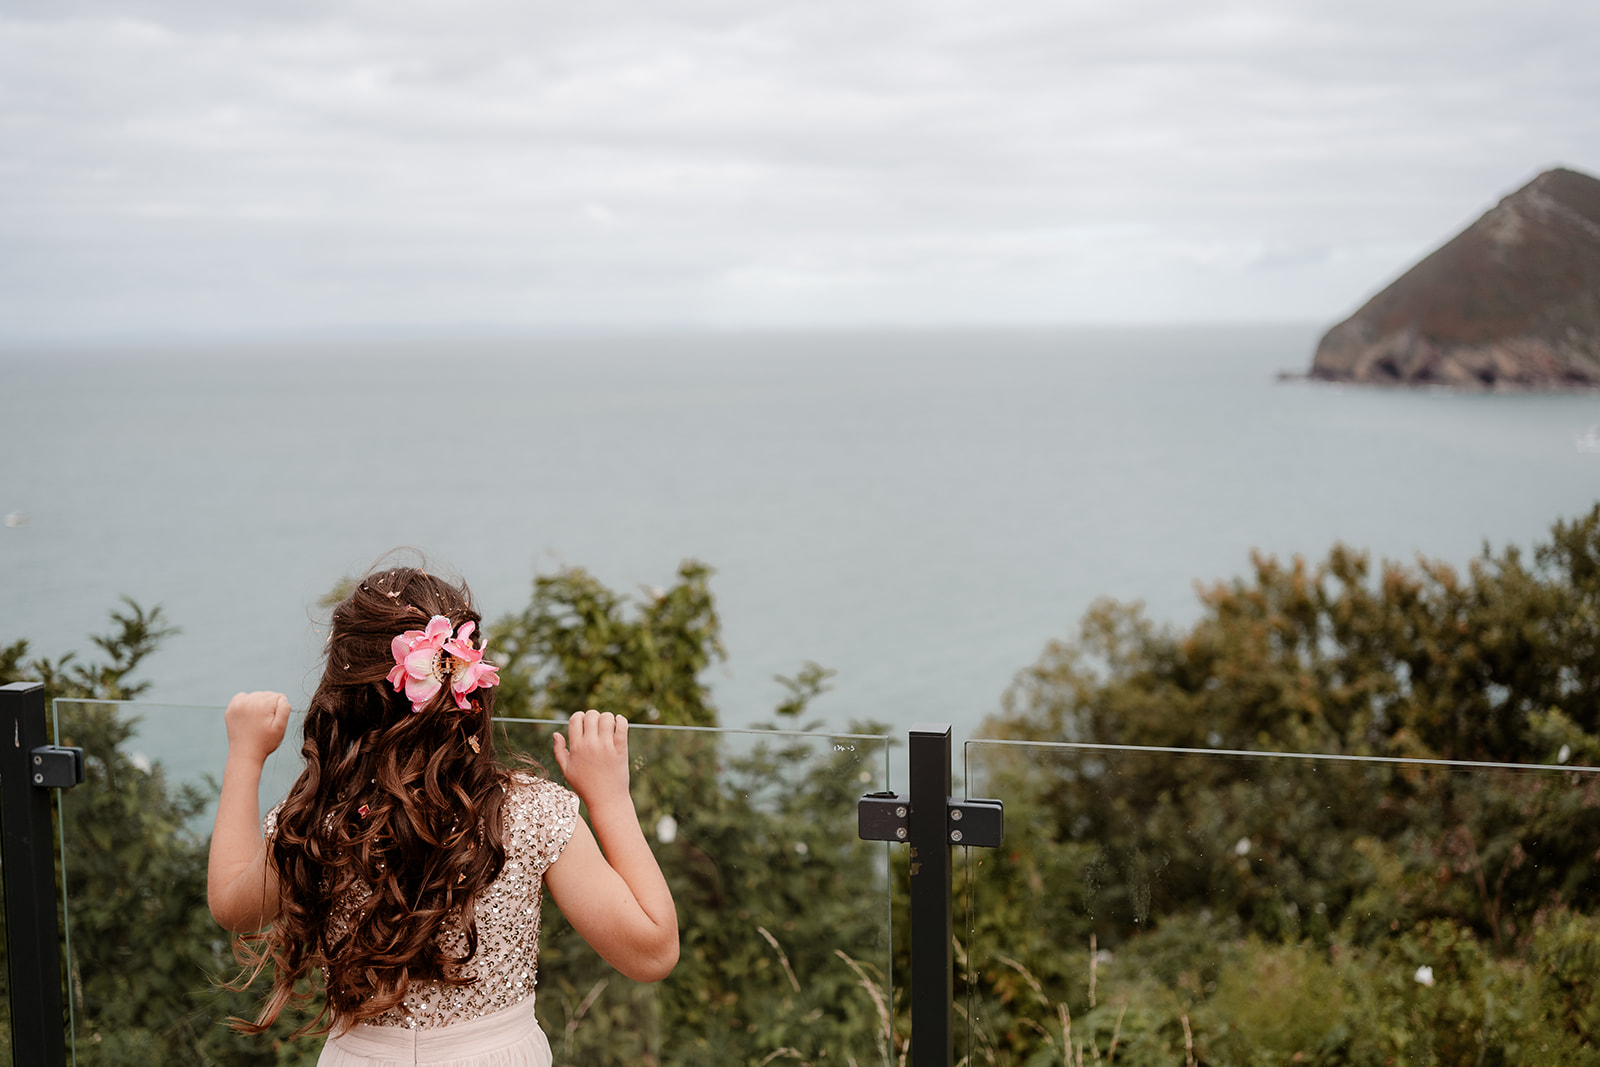 A little girl looks out over the view at a Sandy Cove Hotel wedding